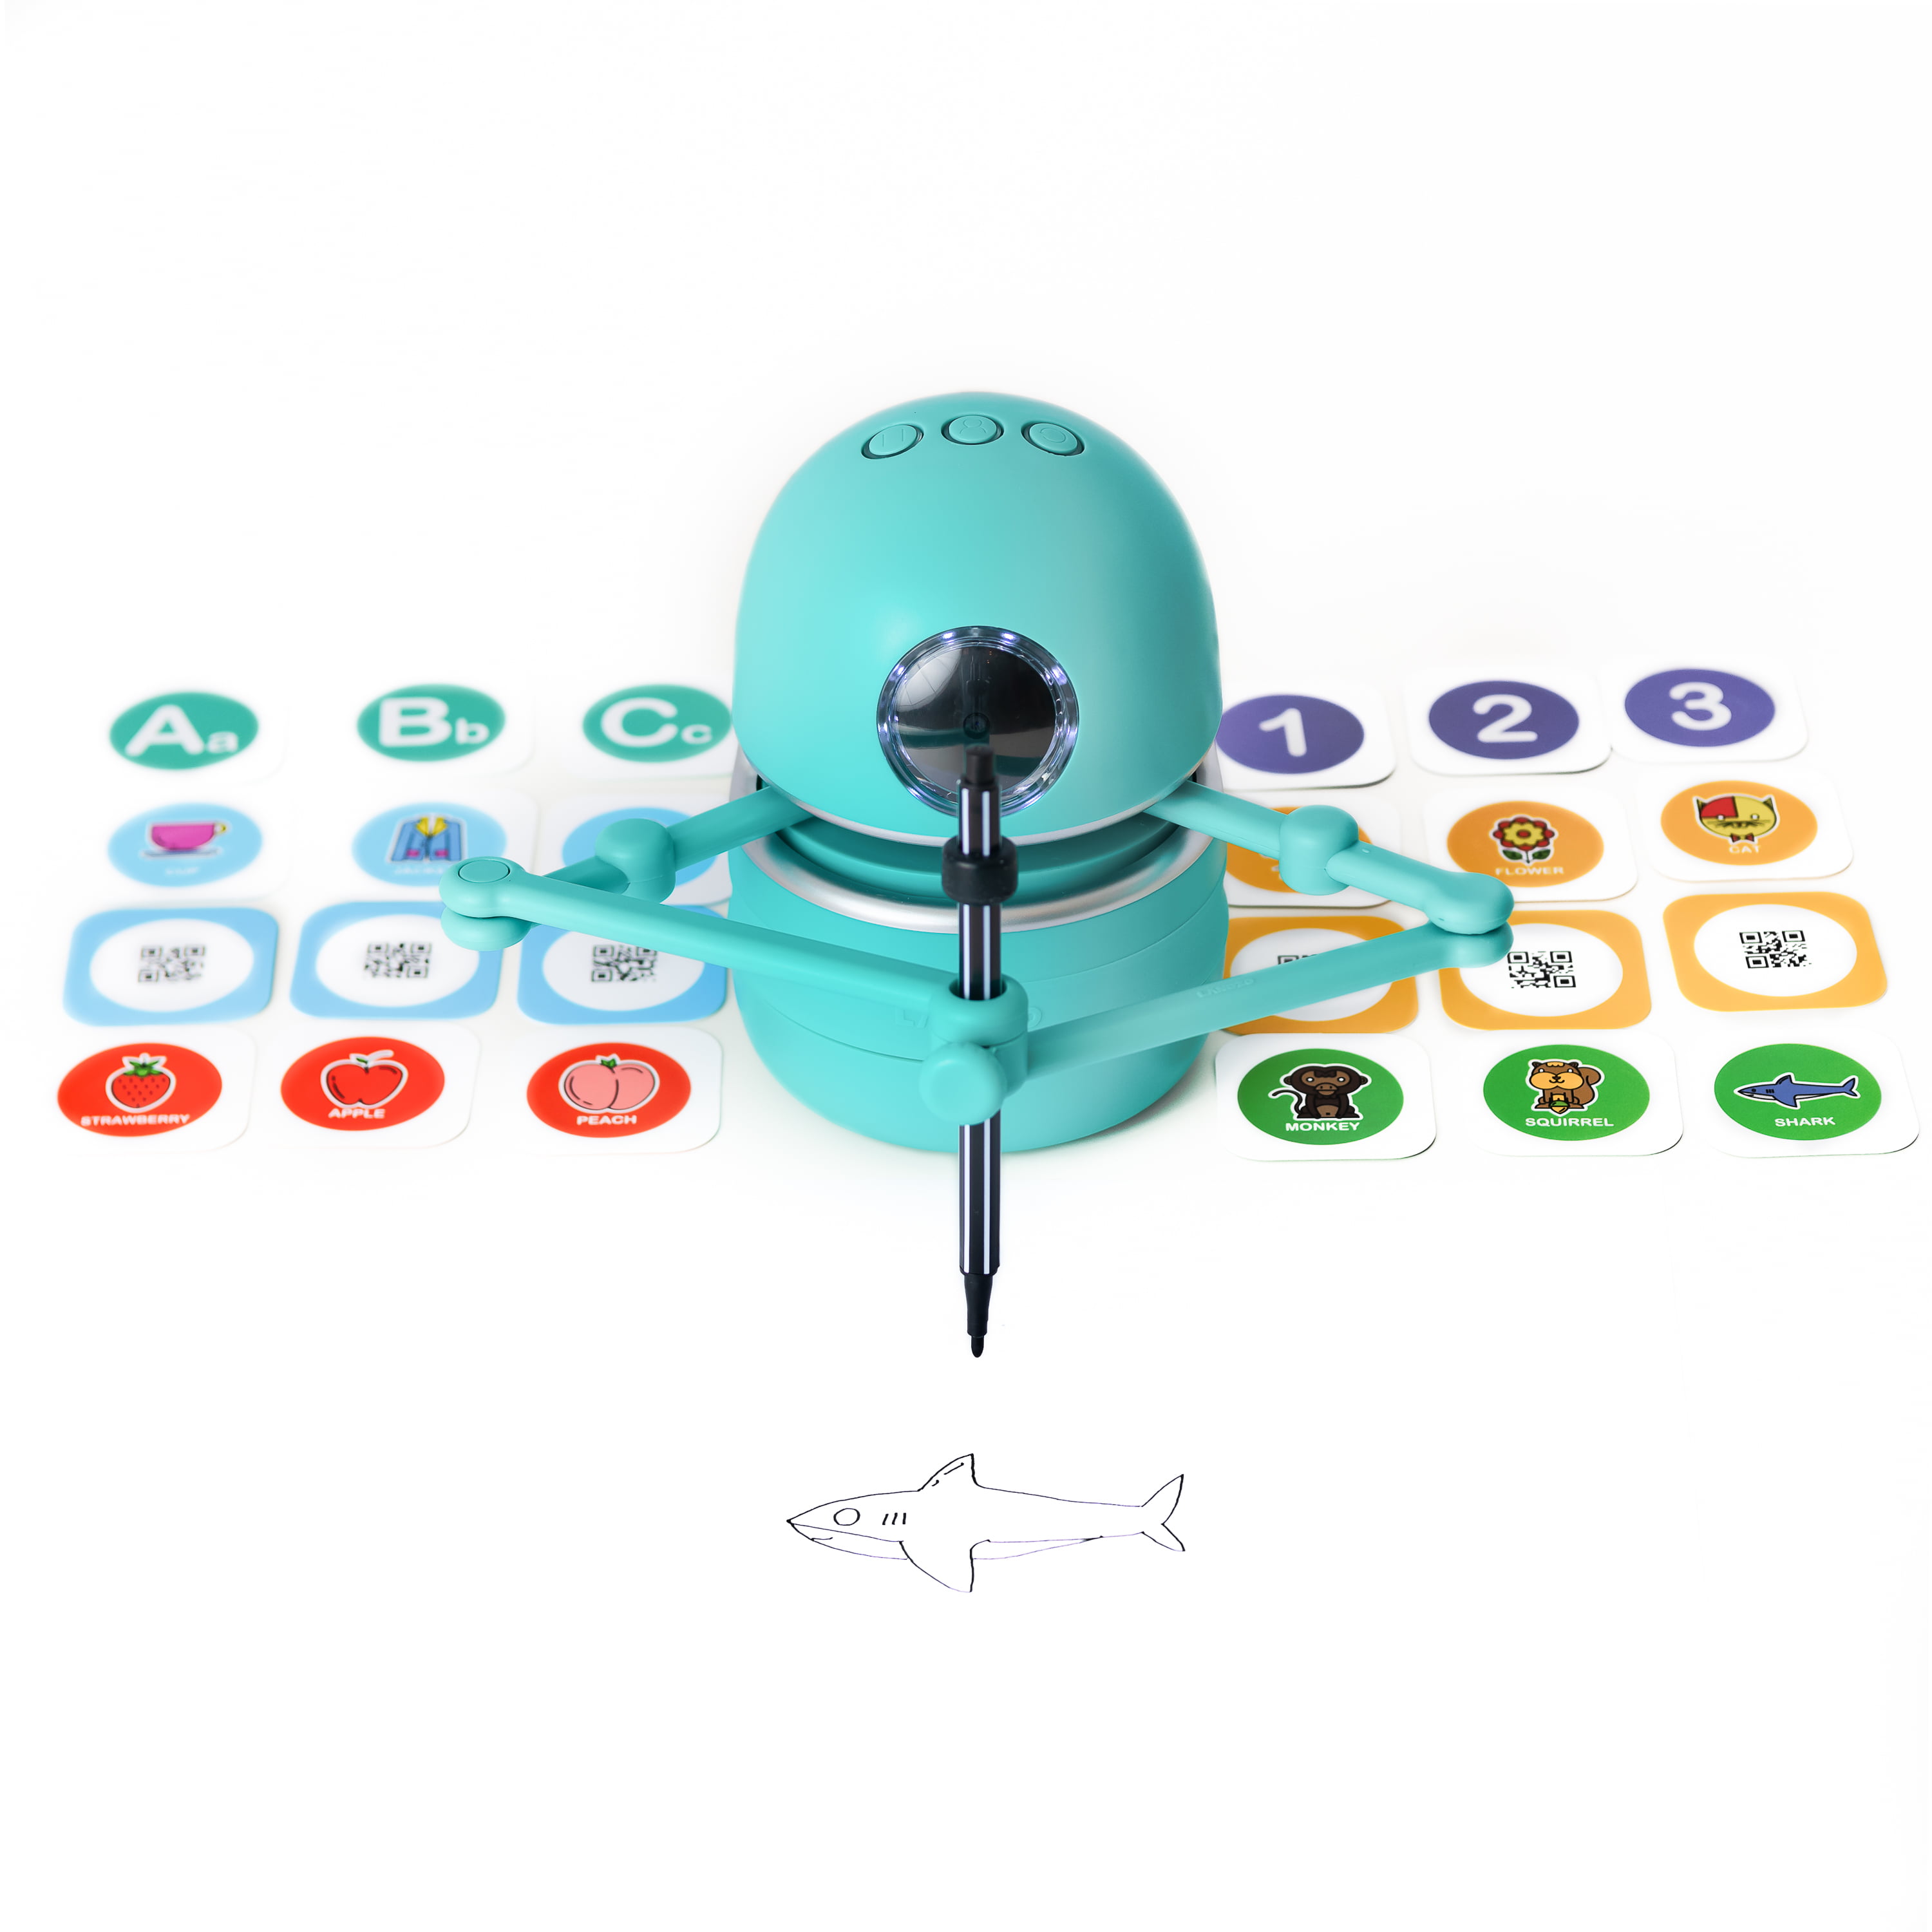 MindWare Quincy Deluxe Robot Teaches Children to Write and Draw - Ages 4+